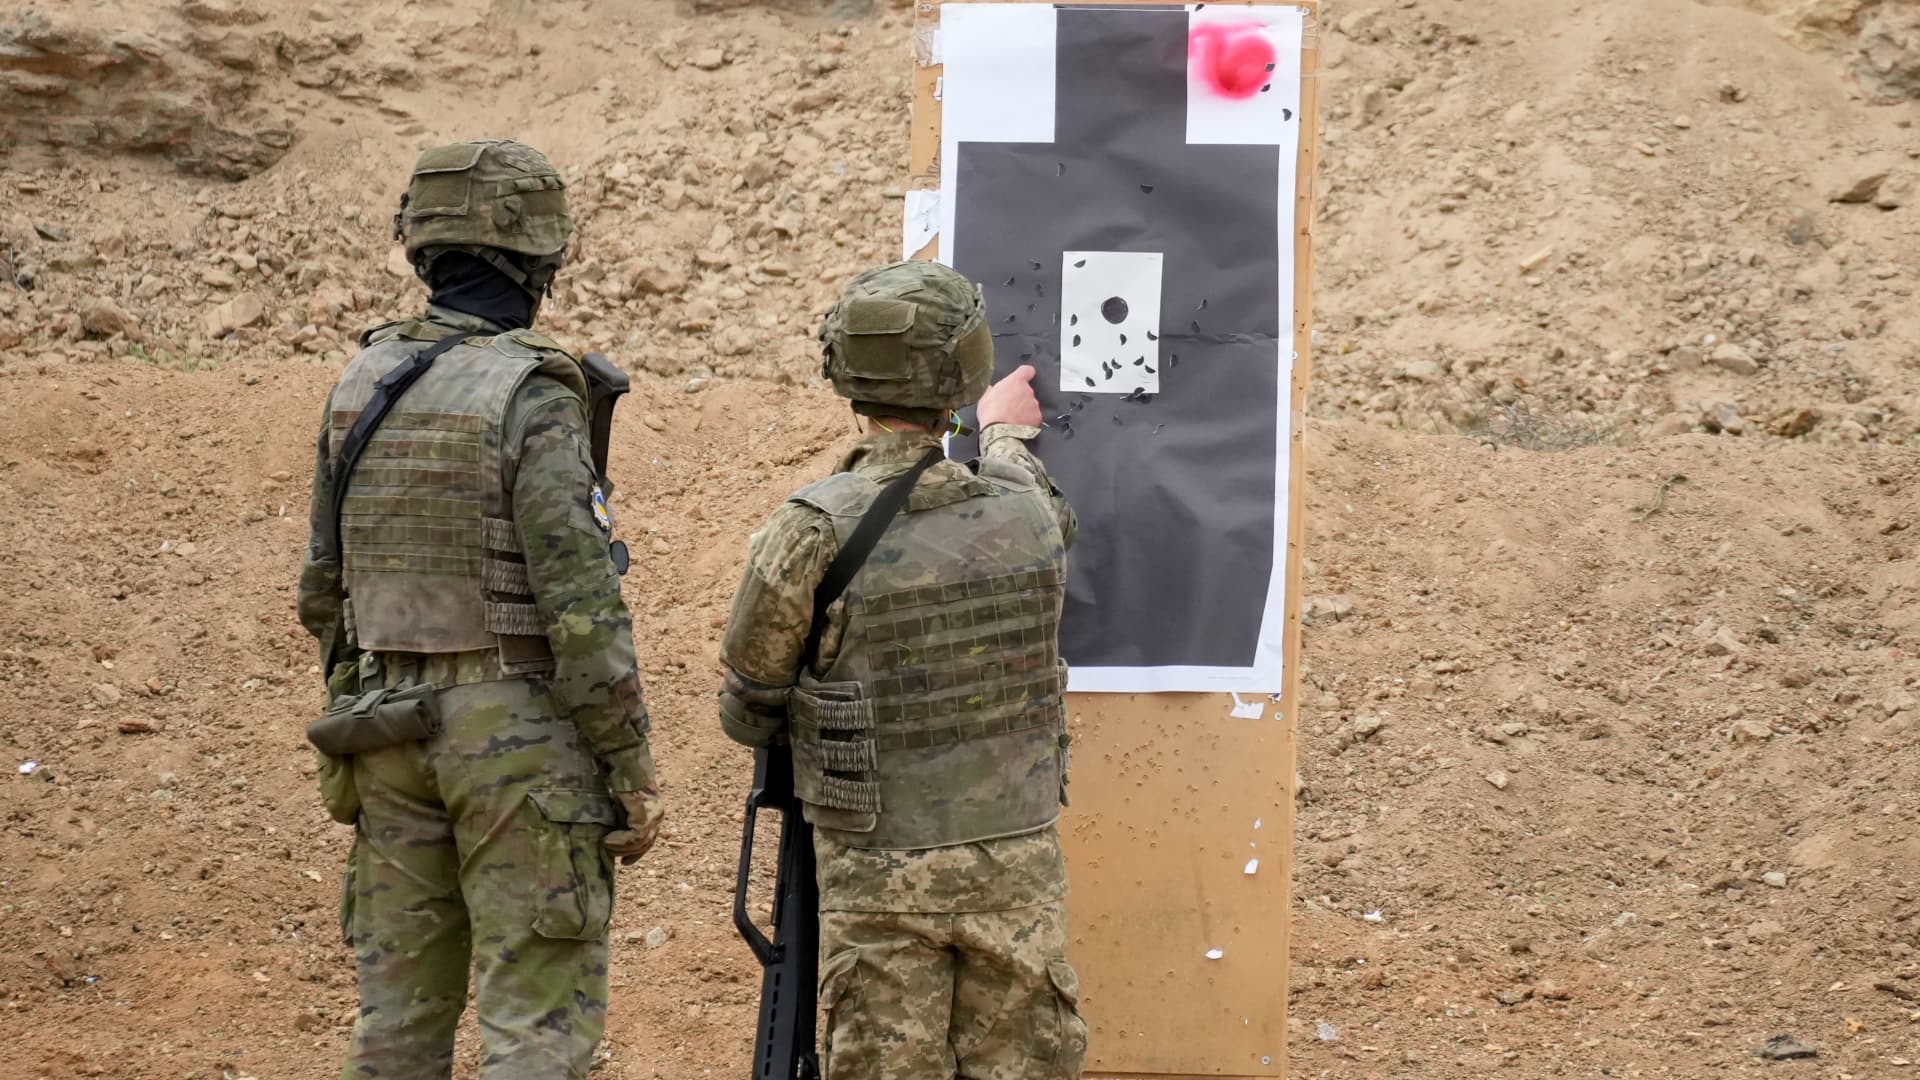 Ukrainian military personnel inspect a target during a firing range exercise, conducted by the Spanish military, at the Toledo infantry academy in Toledo, Spain, on Friday, March 24, 2023. 